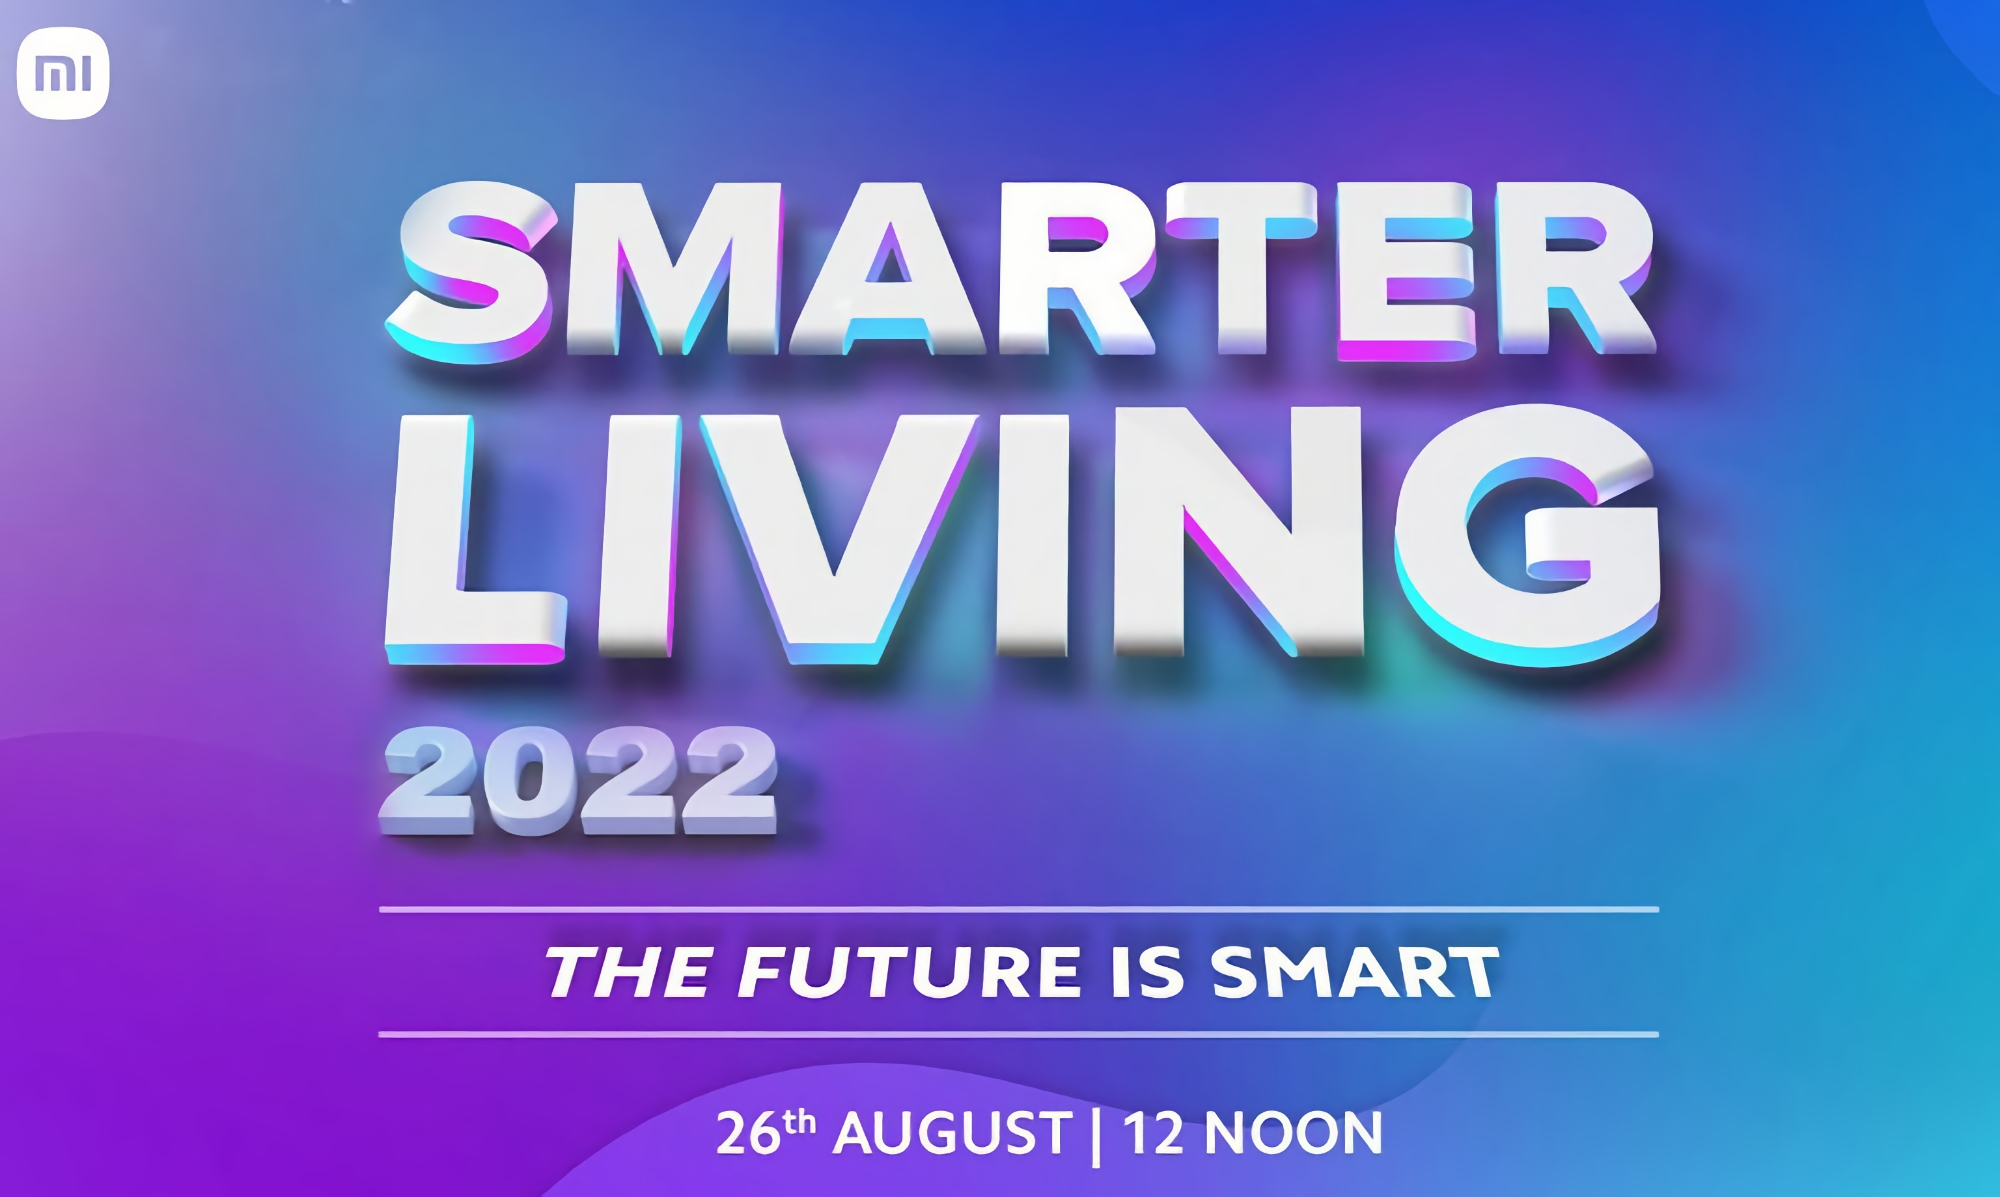 Xiaomi will hold Smarter Living 2022 presentation on August 26: Expect the new Mi Notebook and other devices